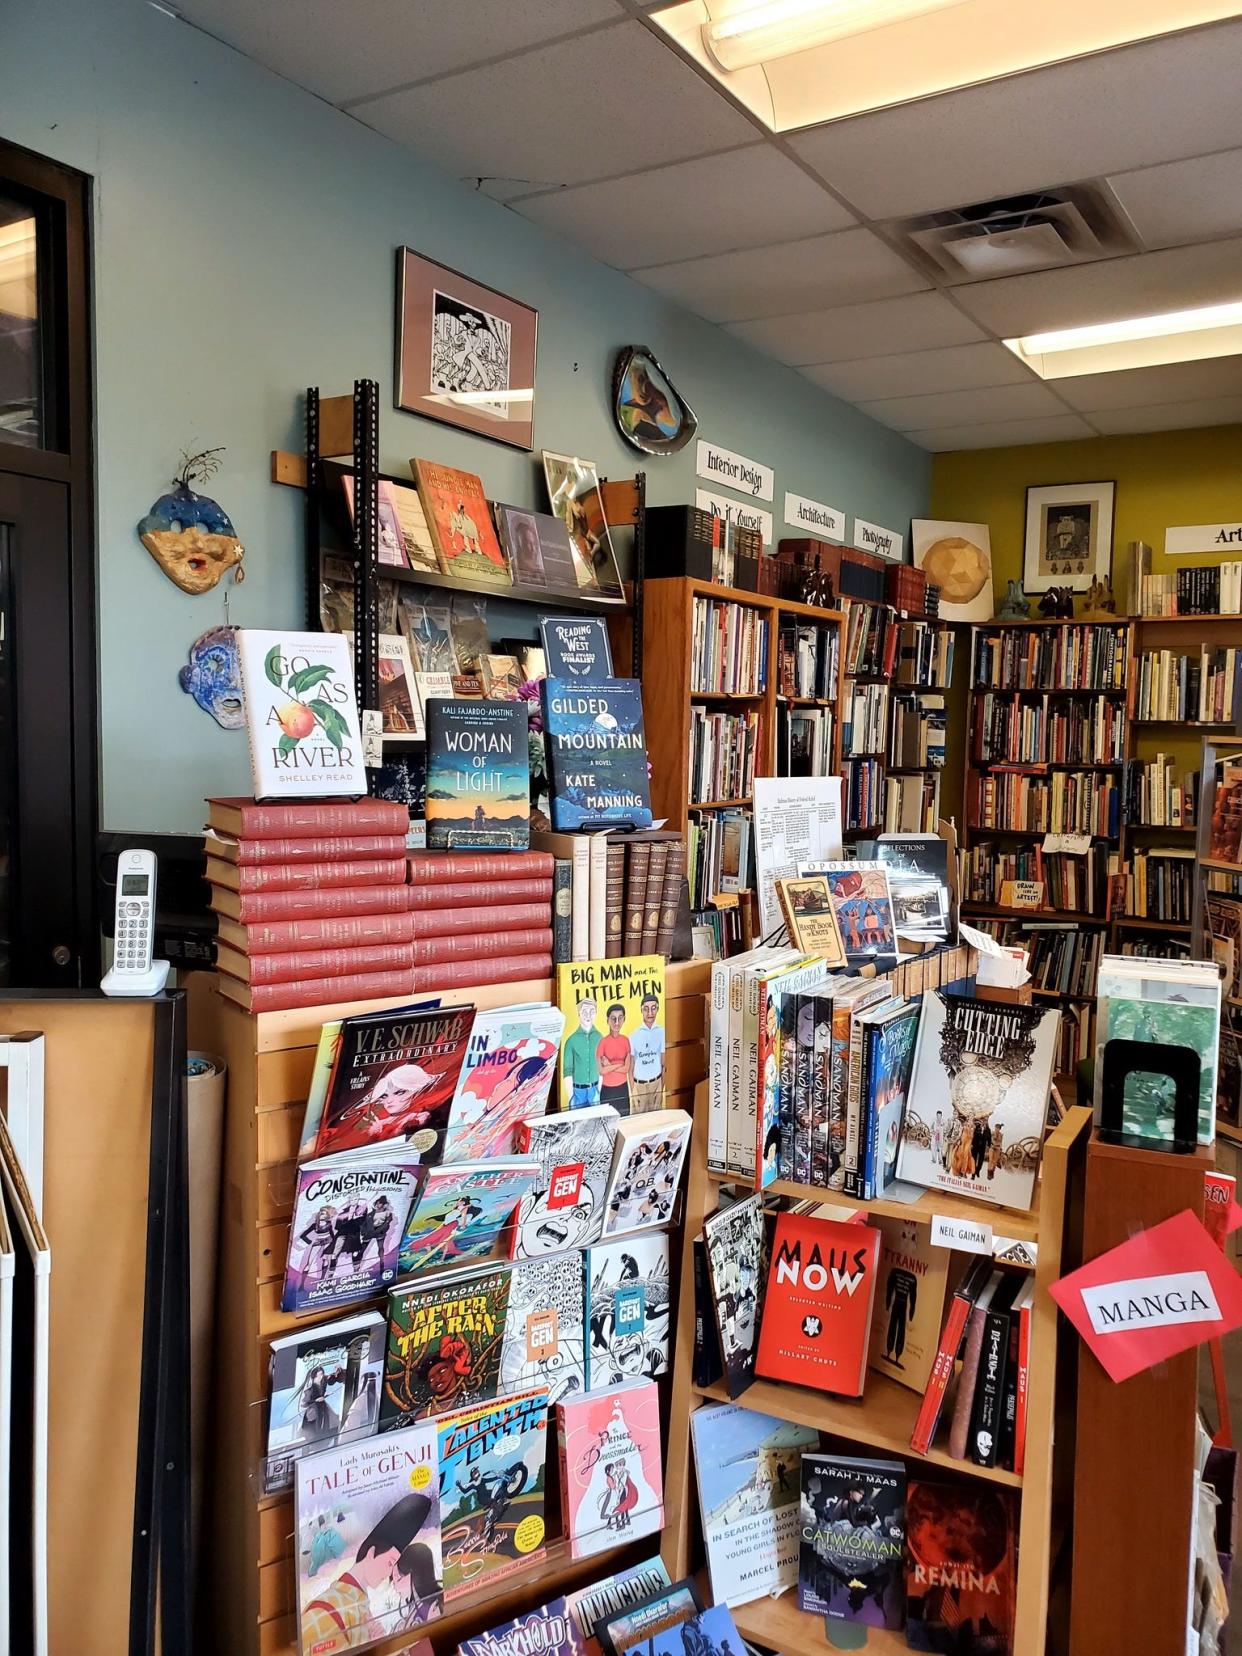 West Side Books, an independent bookstore in Denver, was founded in 1997 and sells new and used books.